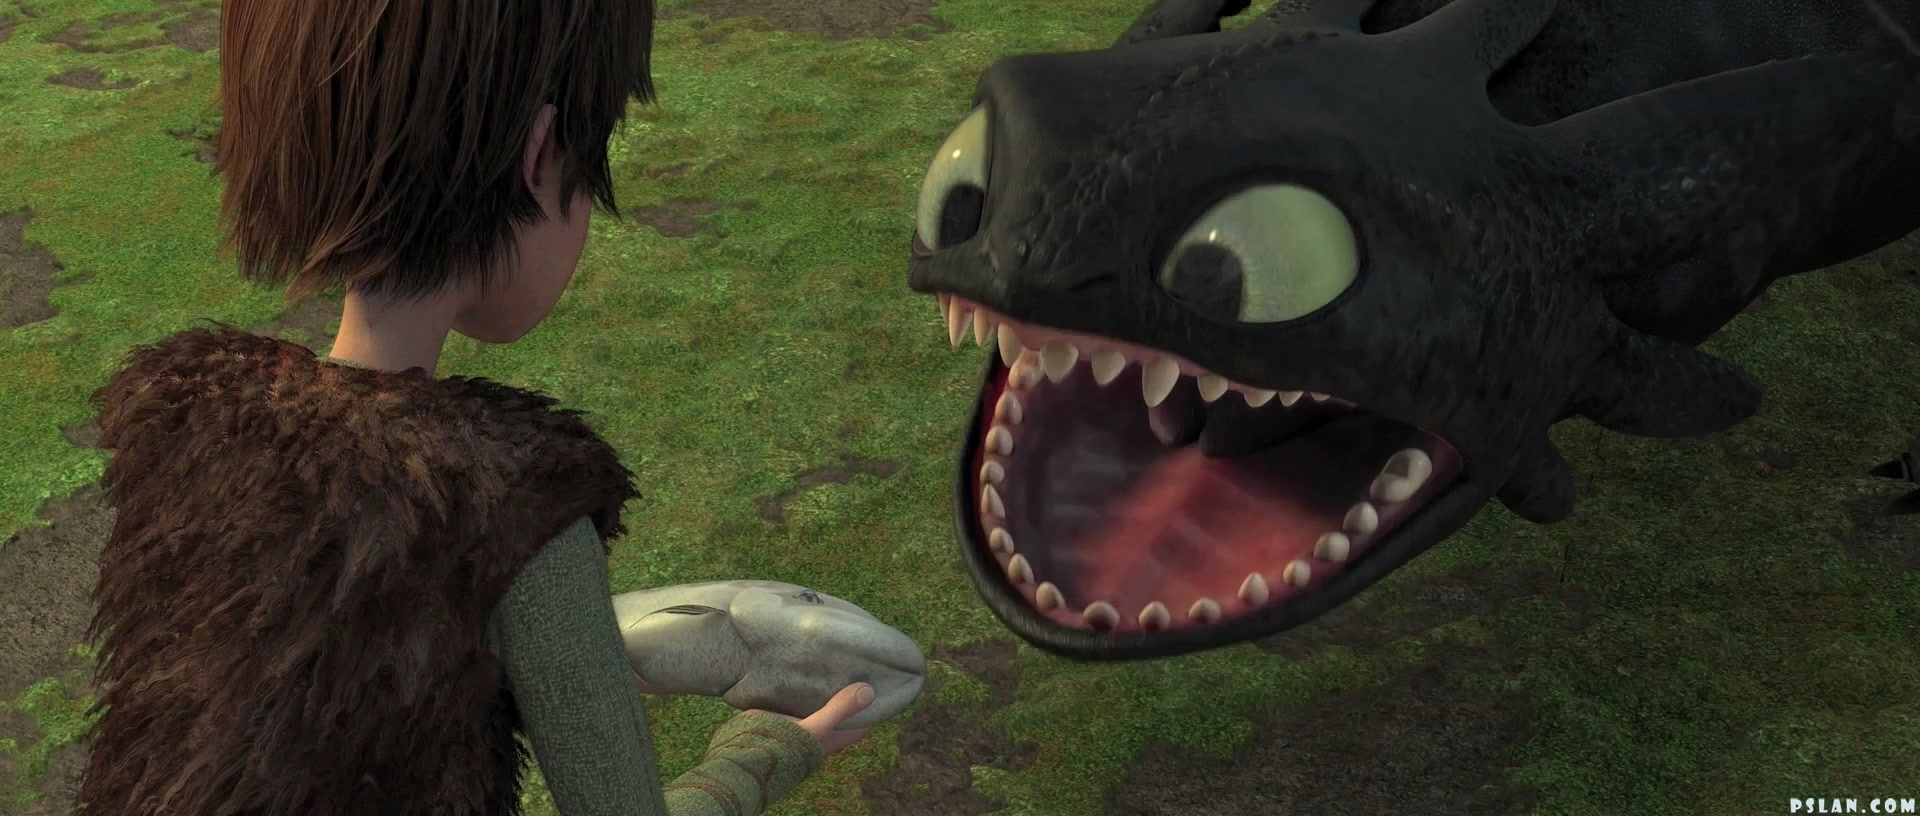 How to Train Your Dragon Toothless Wallpaper